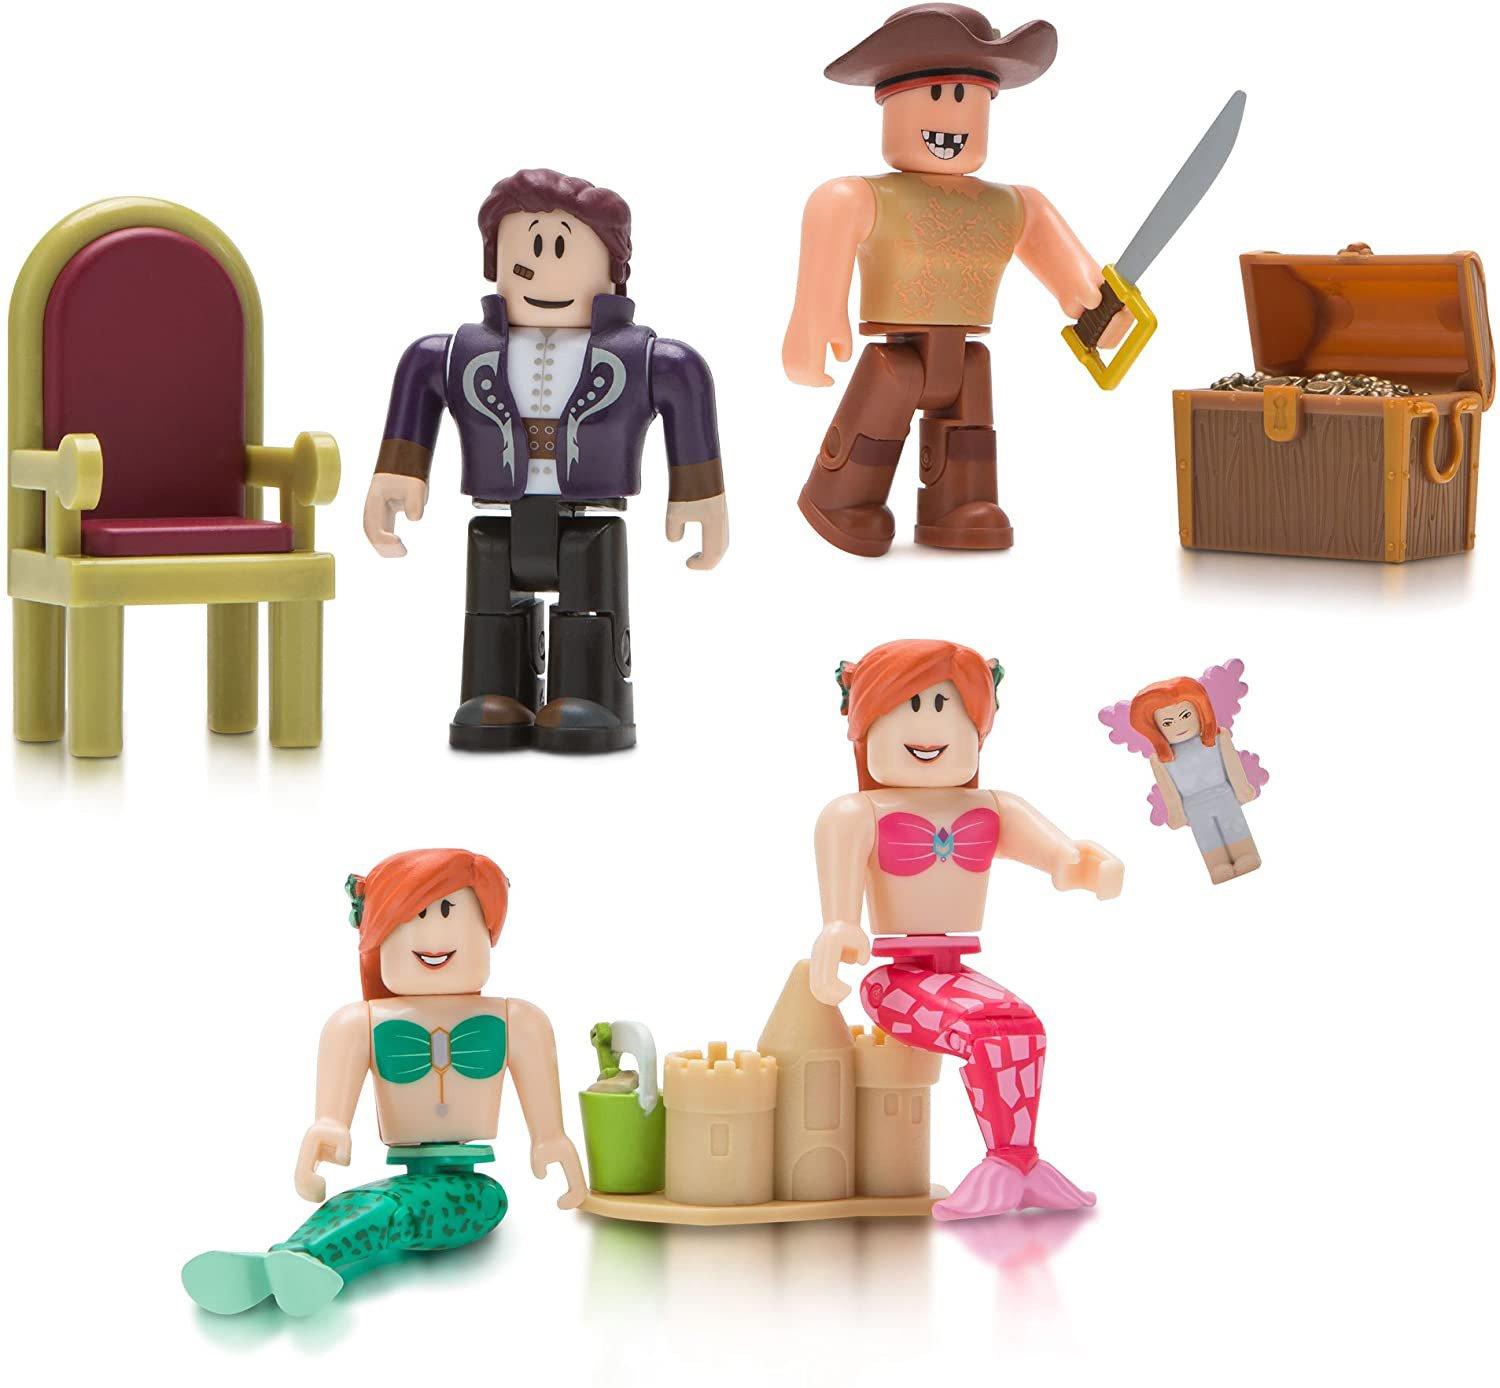 Roblox Celebrity Collection Neverland Lagoon Four Figure Pack Gamestop - 